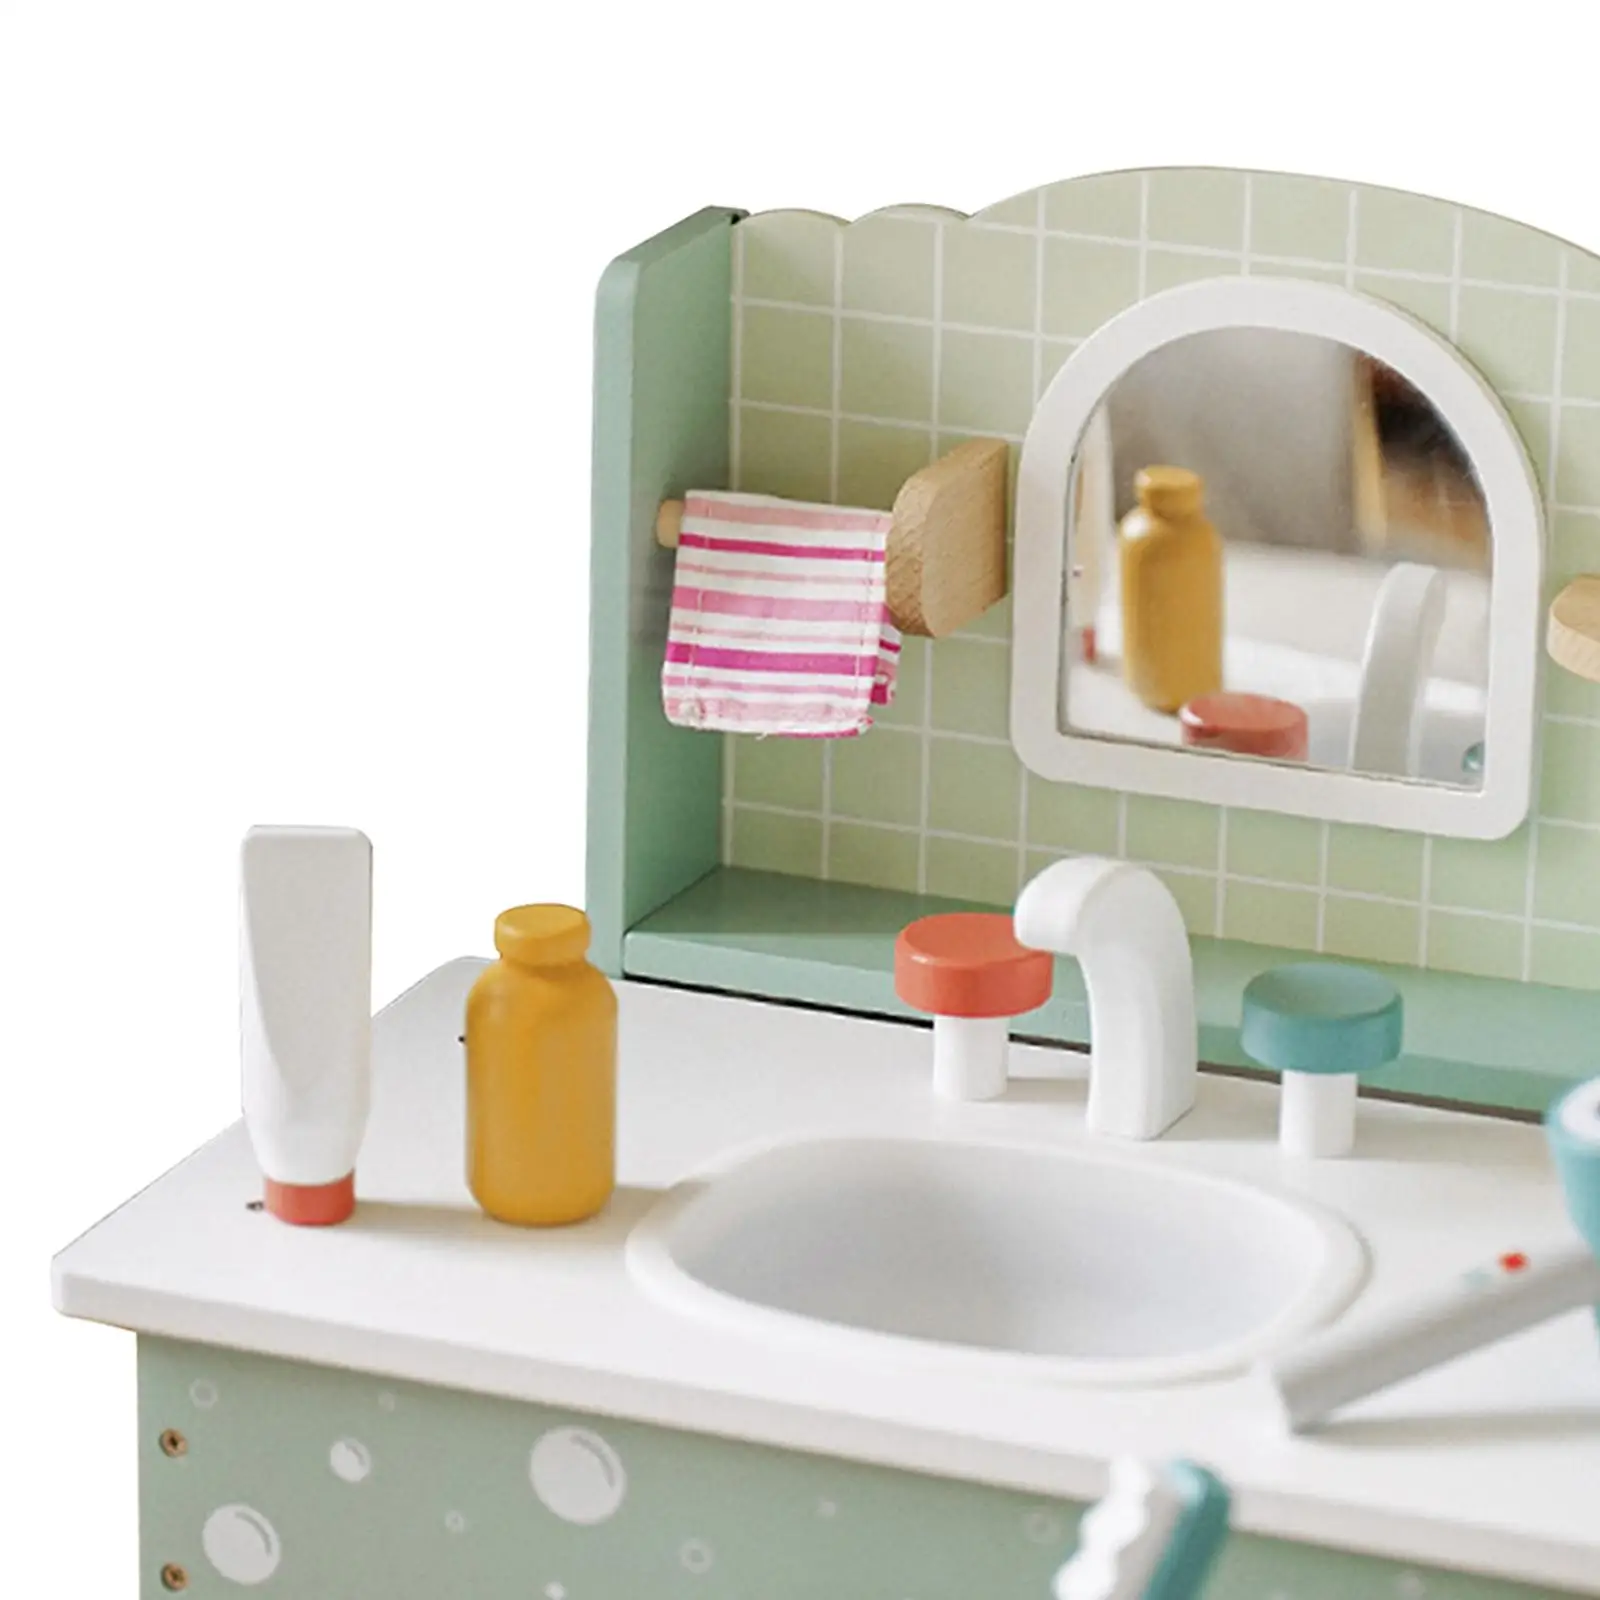 Bathroom Sink Realistic Educational Toy Early Learning Portable with Mirror for Kids Children Girls 3+ Years Old Birthday Gifts